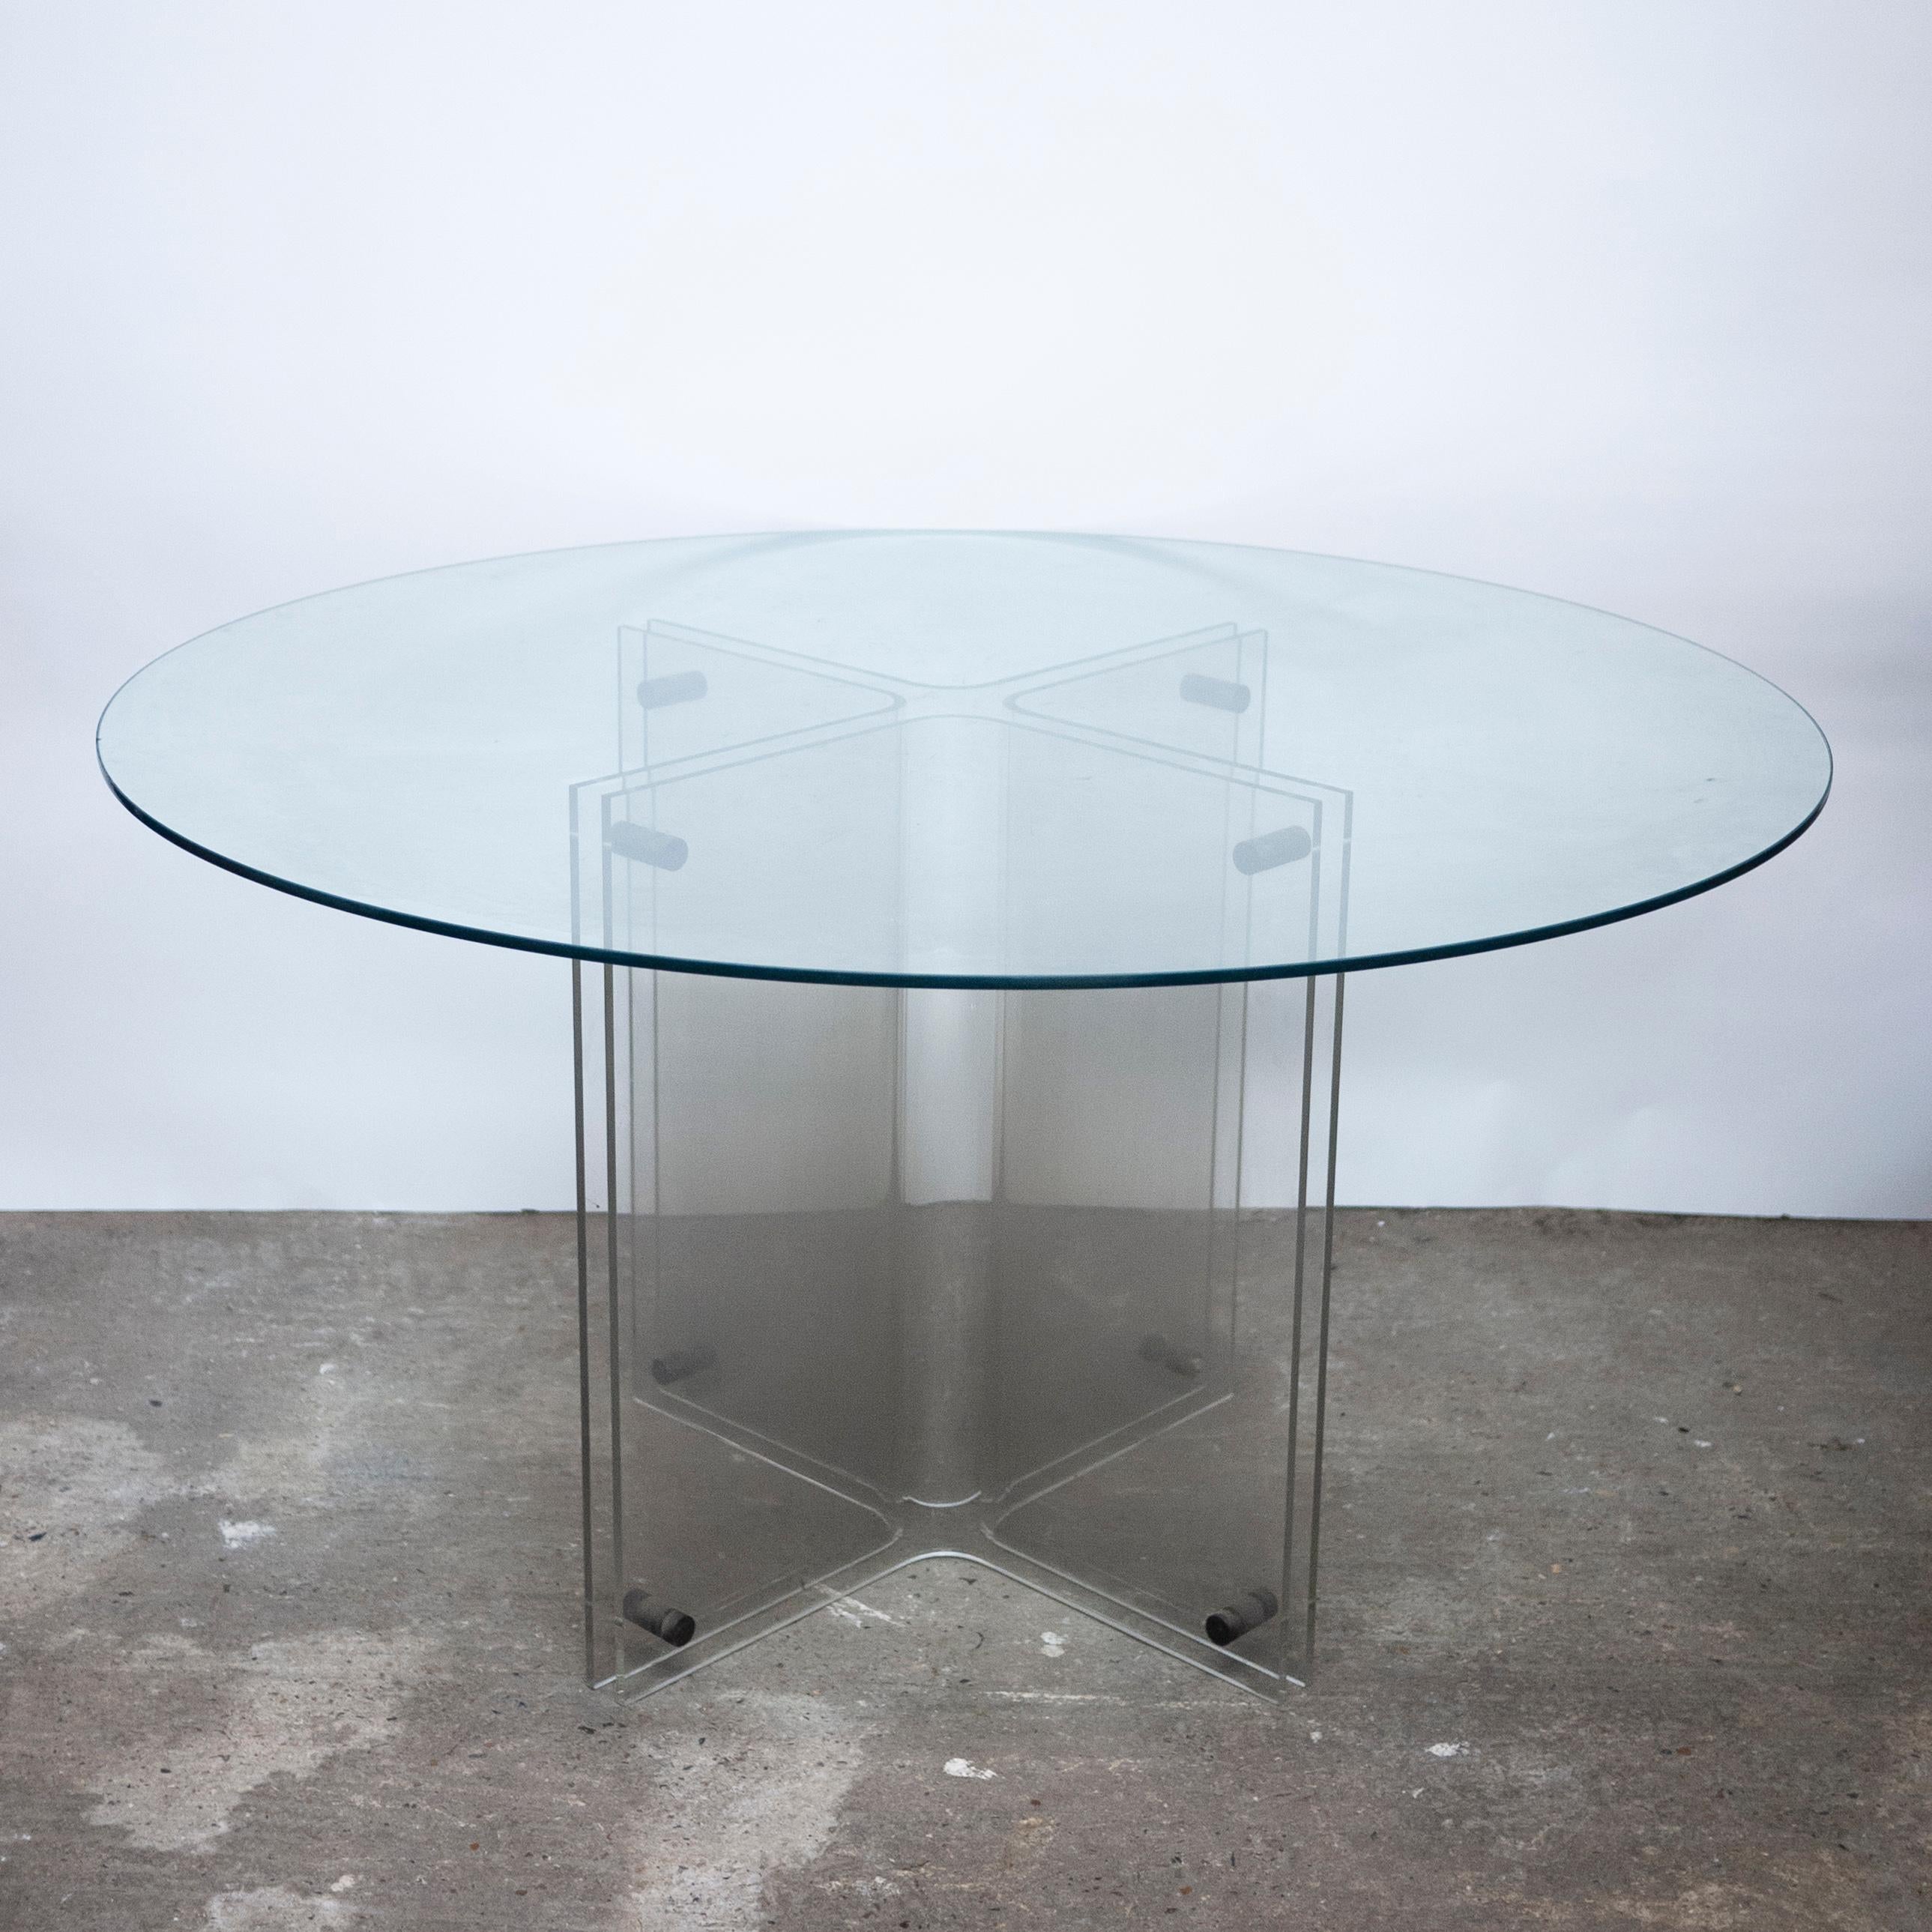 Vintage Hollywood Regency Lucite and Glass Round Dining Table, 1980s For Sale 11